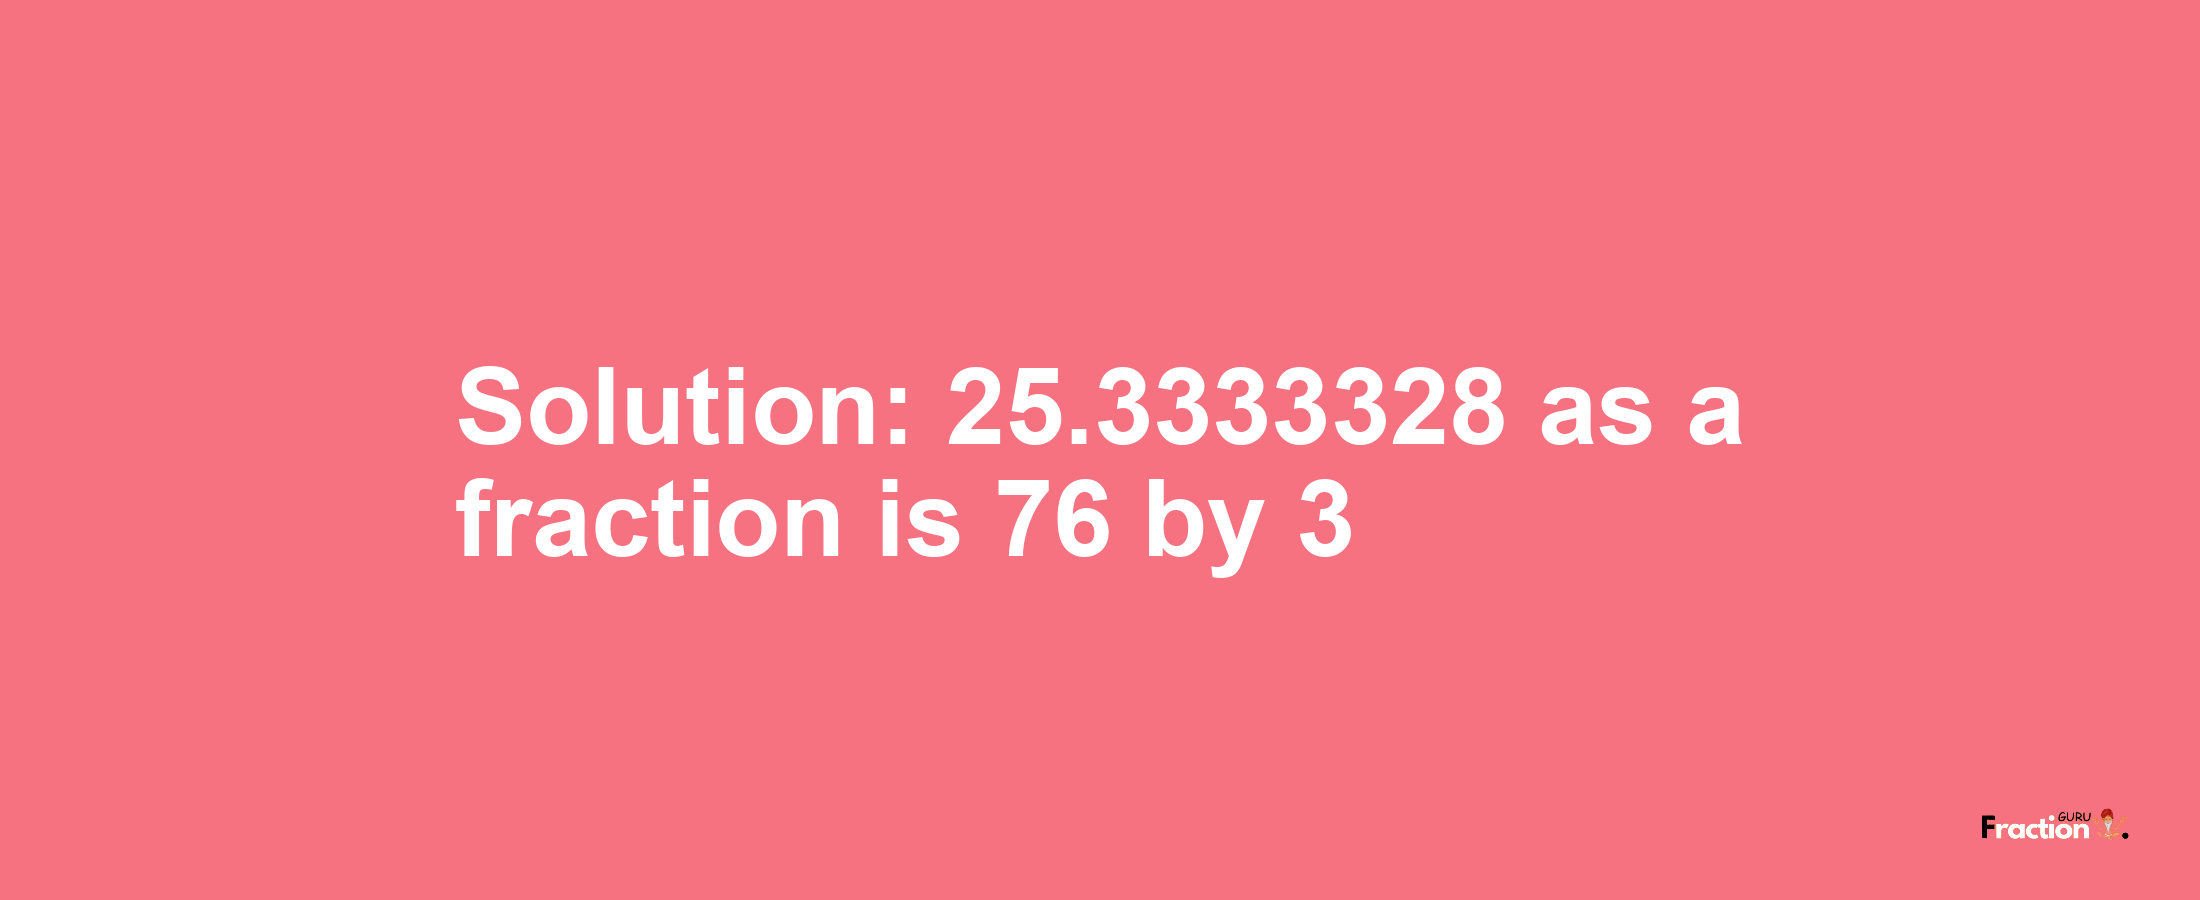 Solution:25.3333328 as a fraction is 76/3